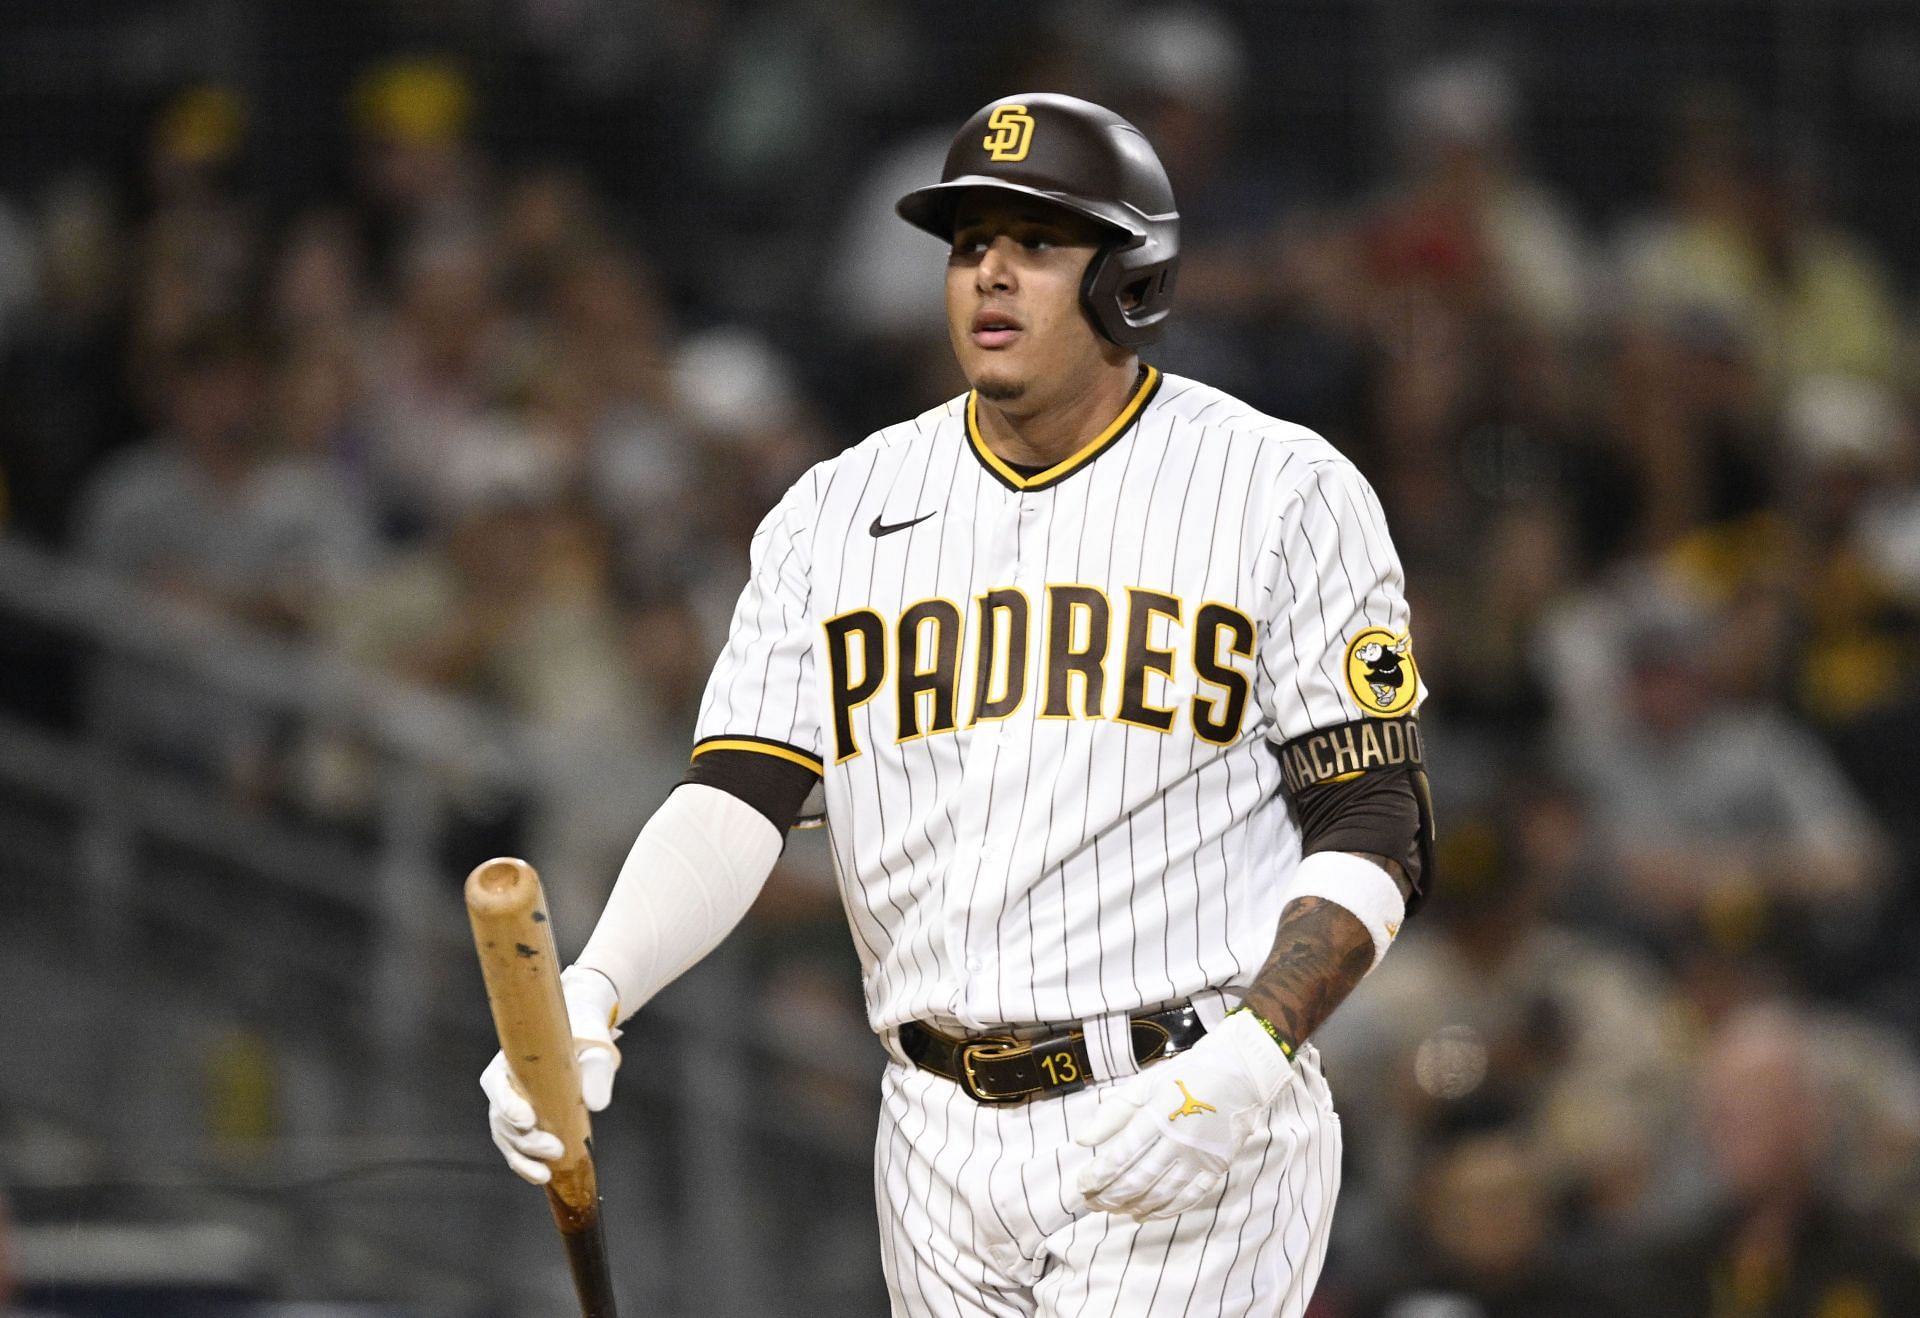 Manny Machado and the San Diego Padres face the Colorado Rockies on Friday.